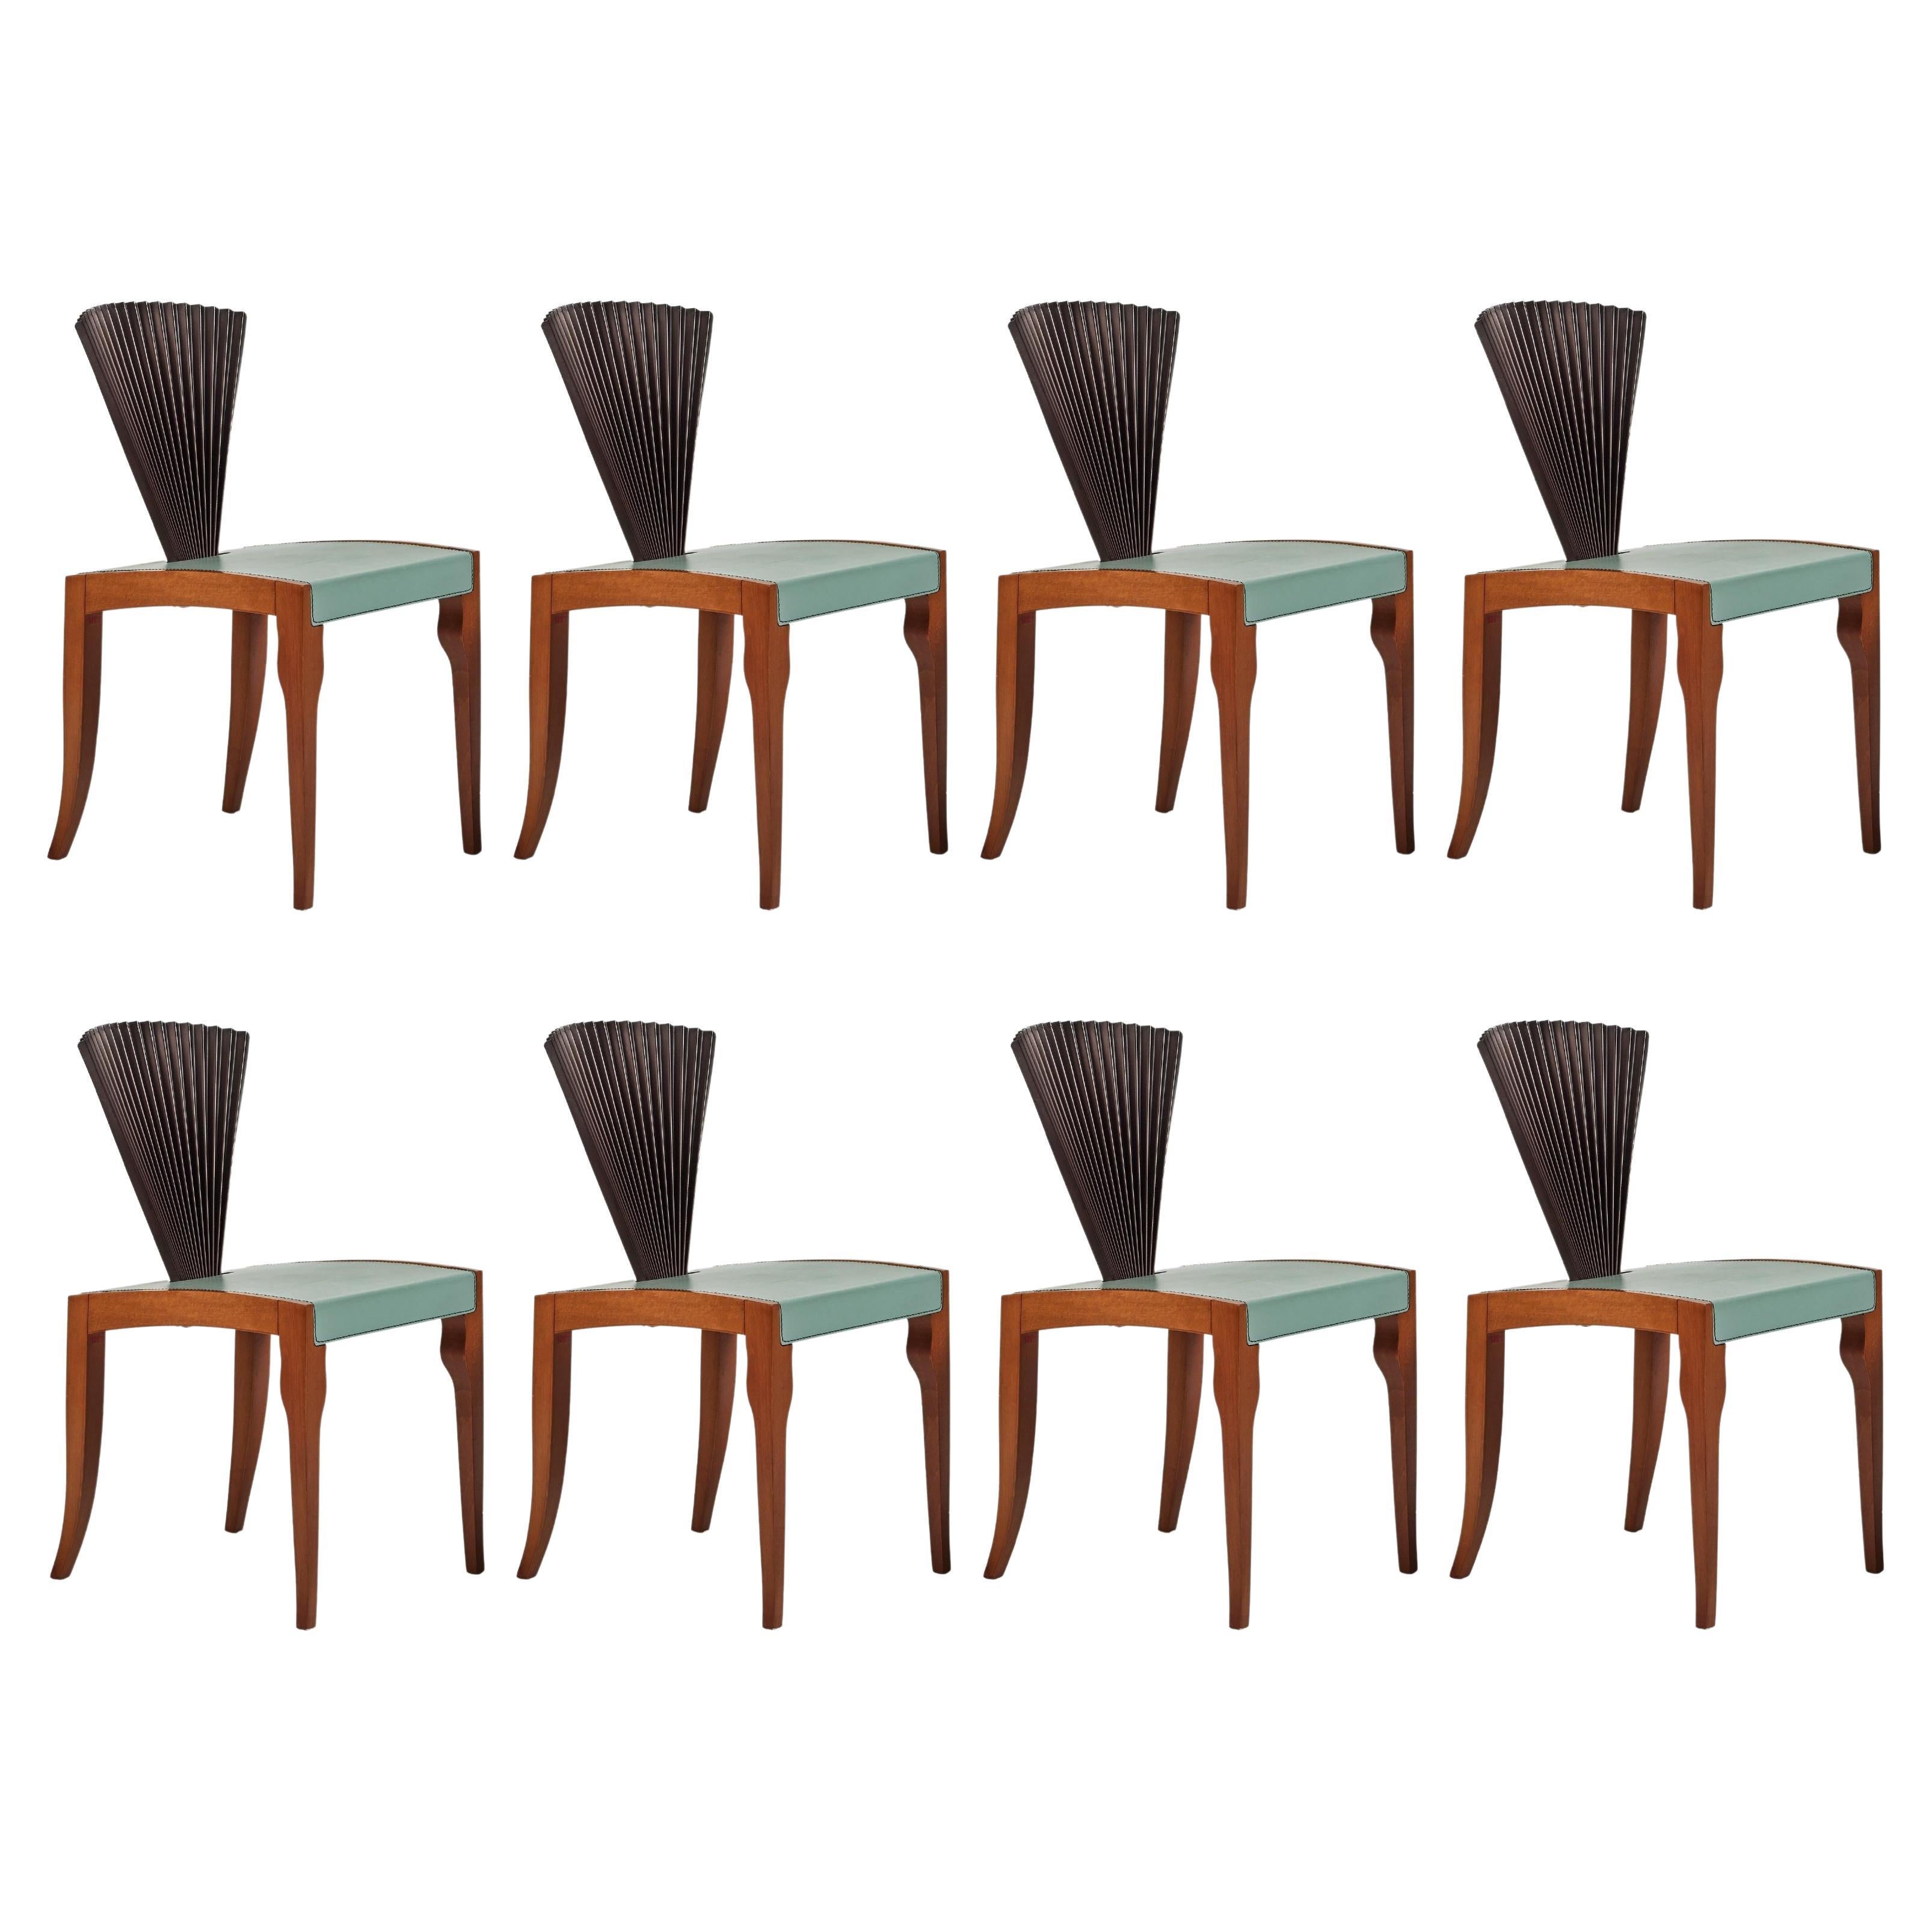 Eight Dining Chairs by Cattelan Italia